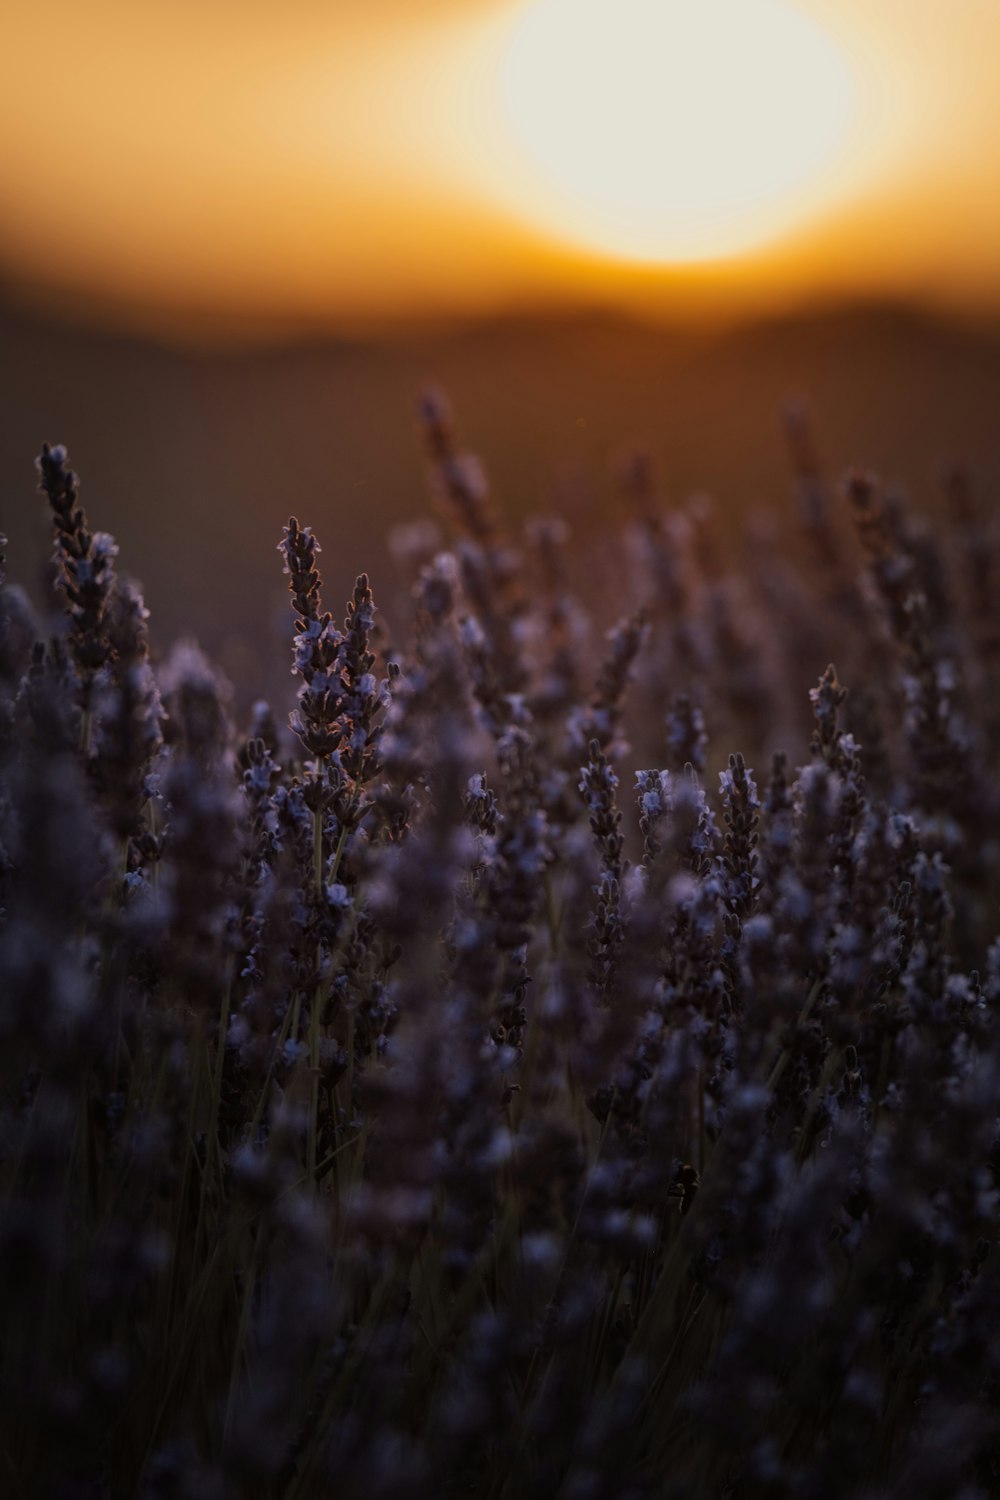 a field of lavender flowers with the sun in the background